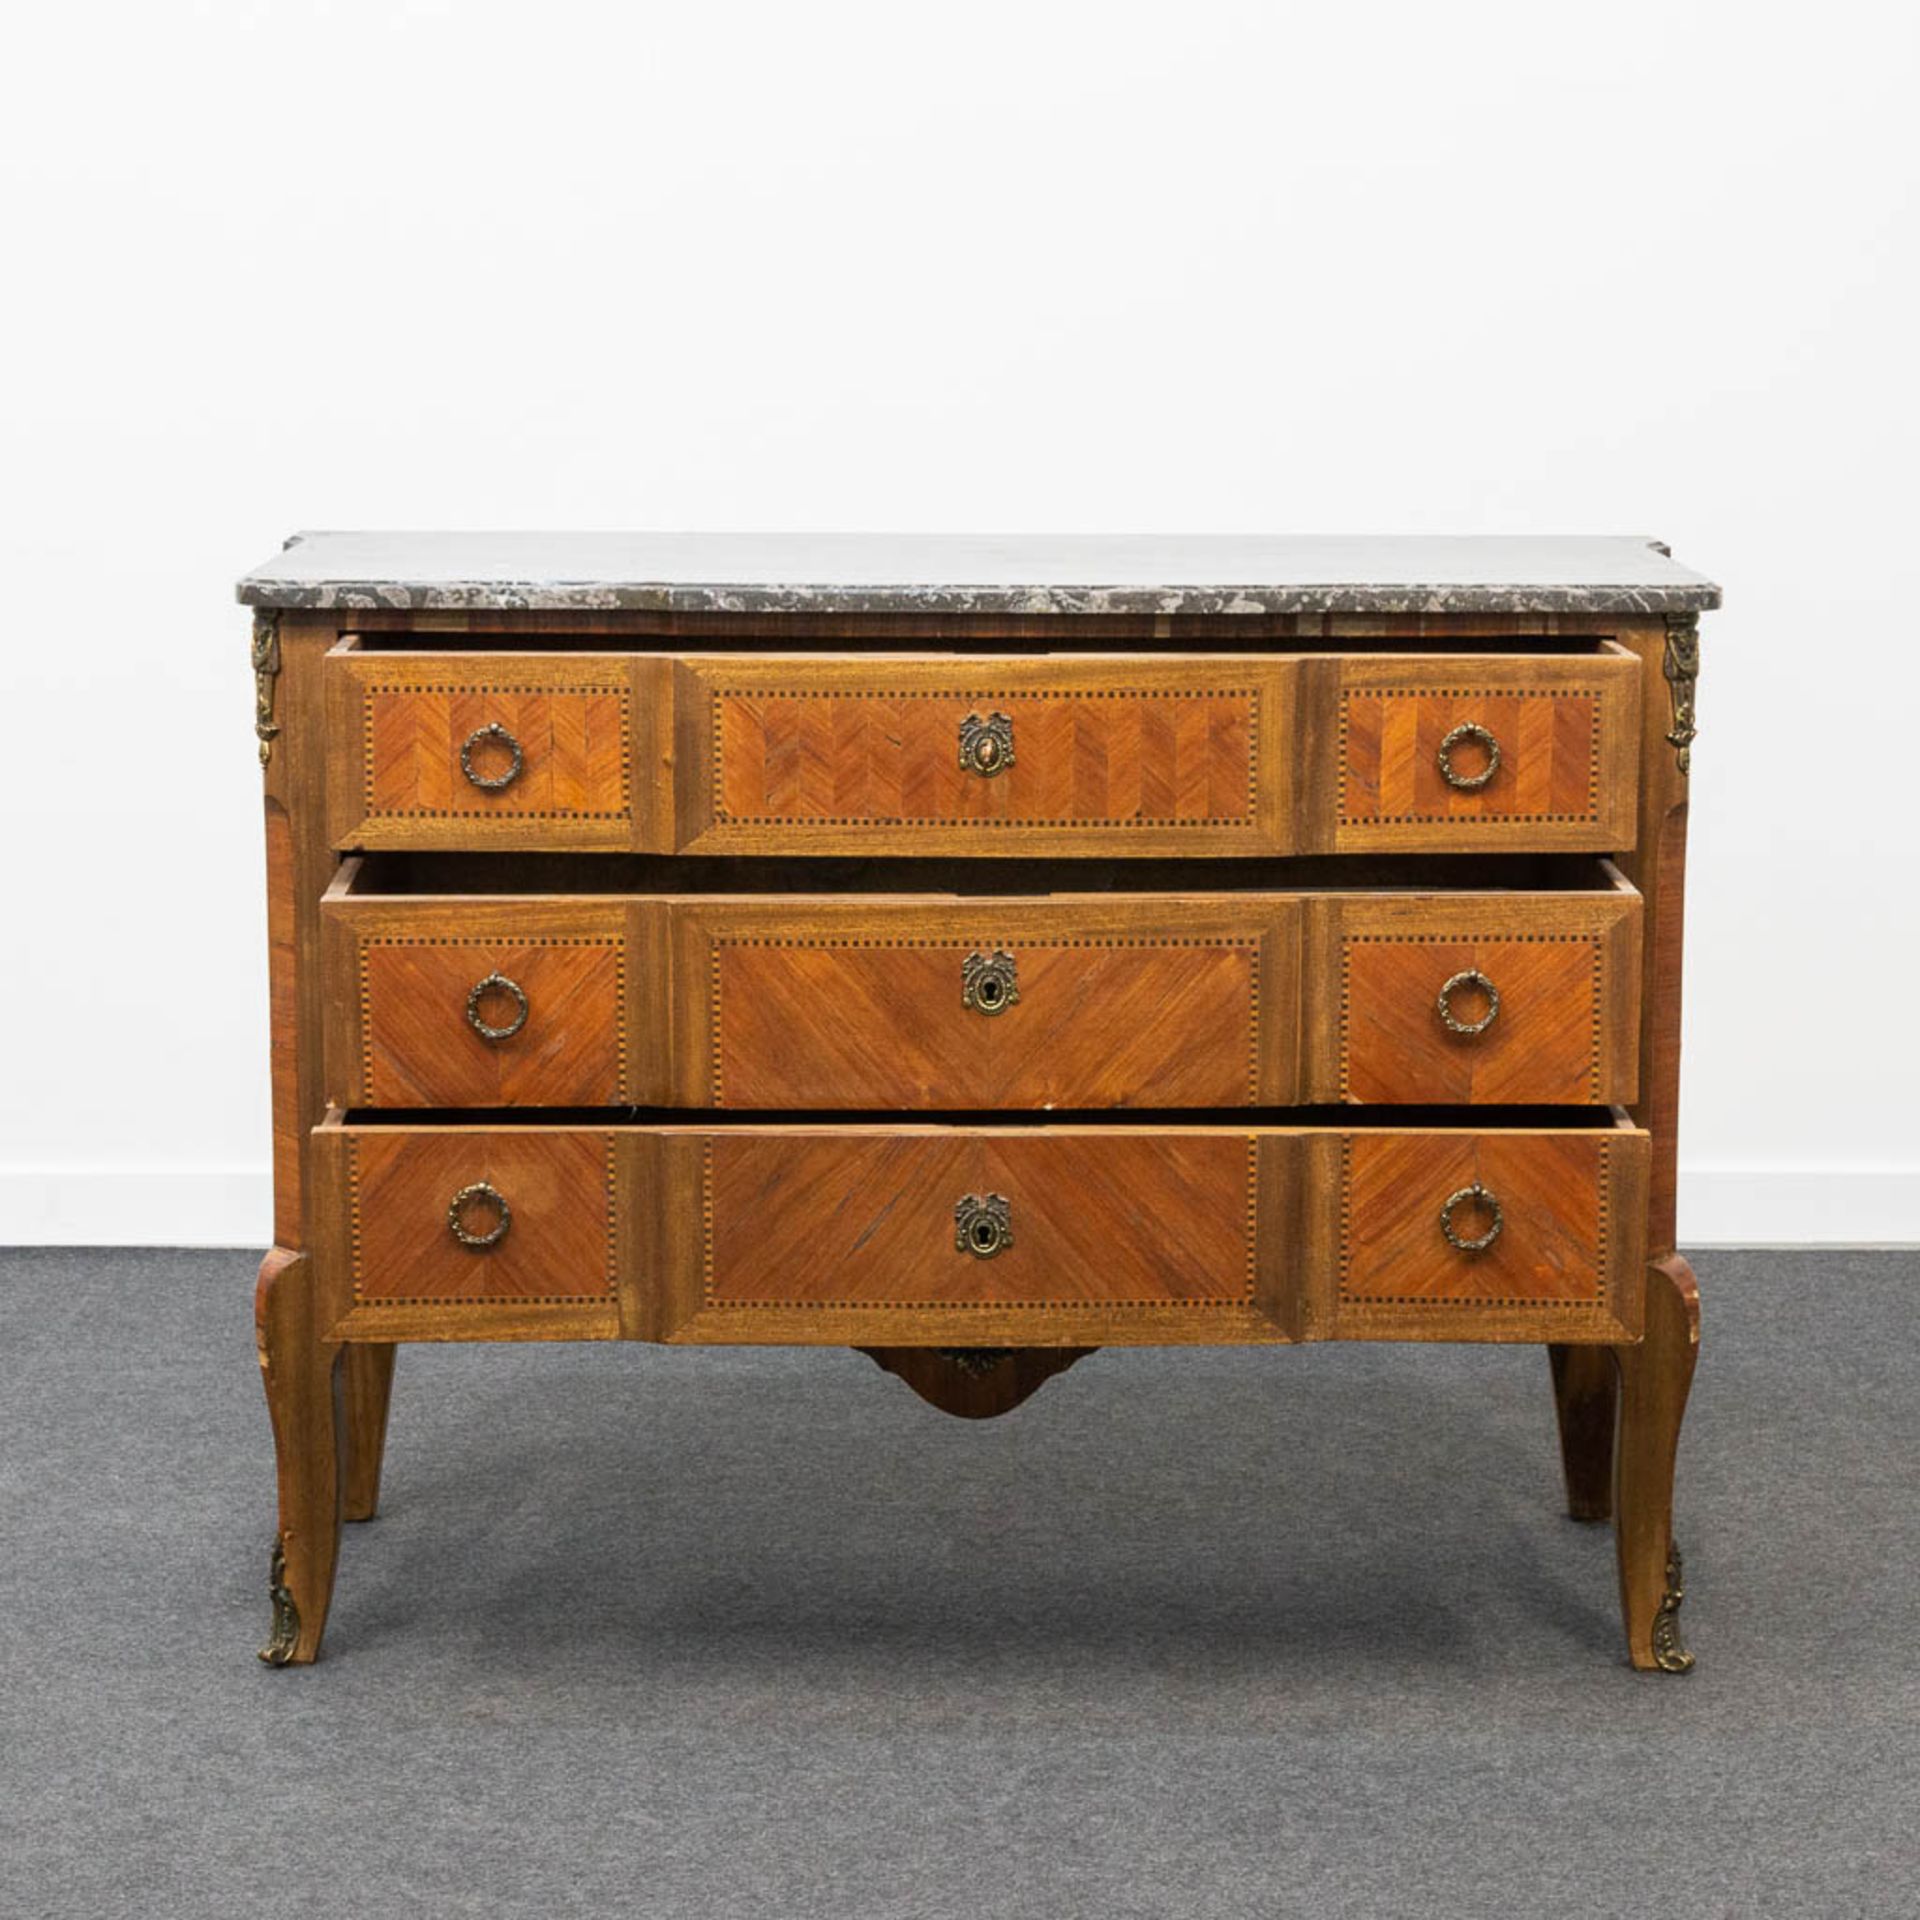 A bronze mounted 3-drawer commode with marble top. - Image 3 of 19